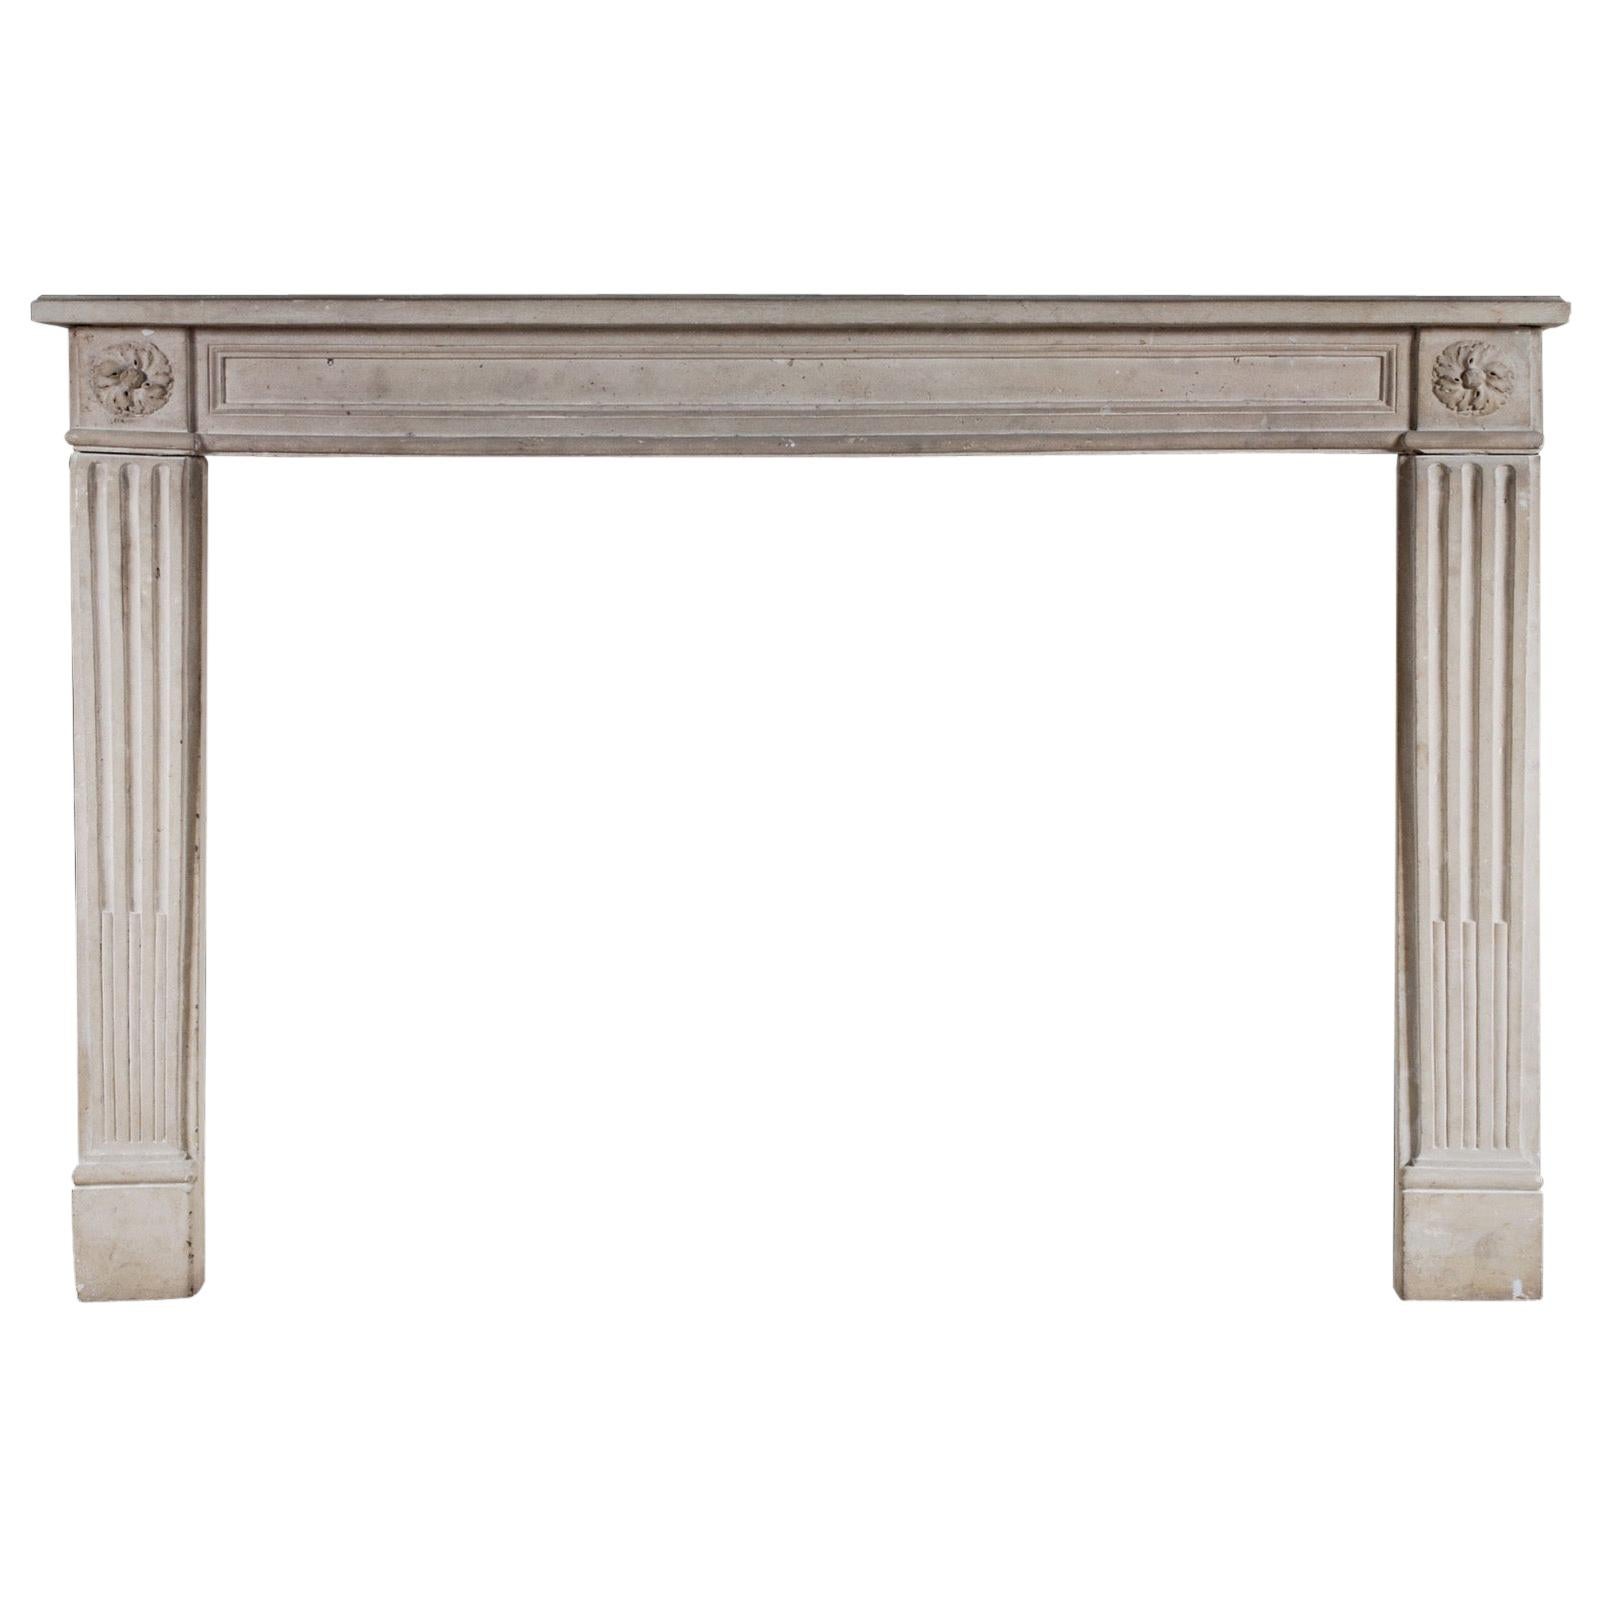 19th Century French Louis XVI Style Stone Fireplace For Sale